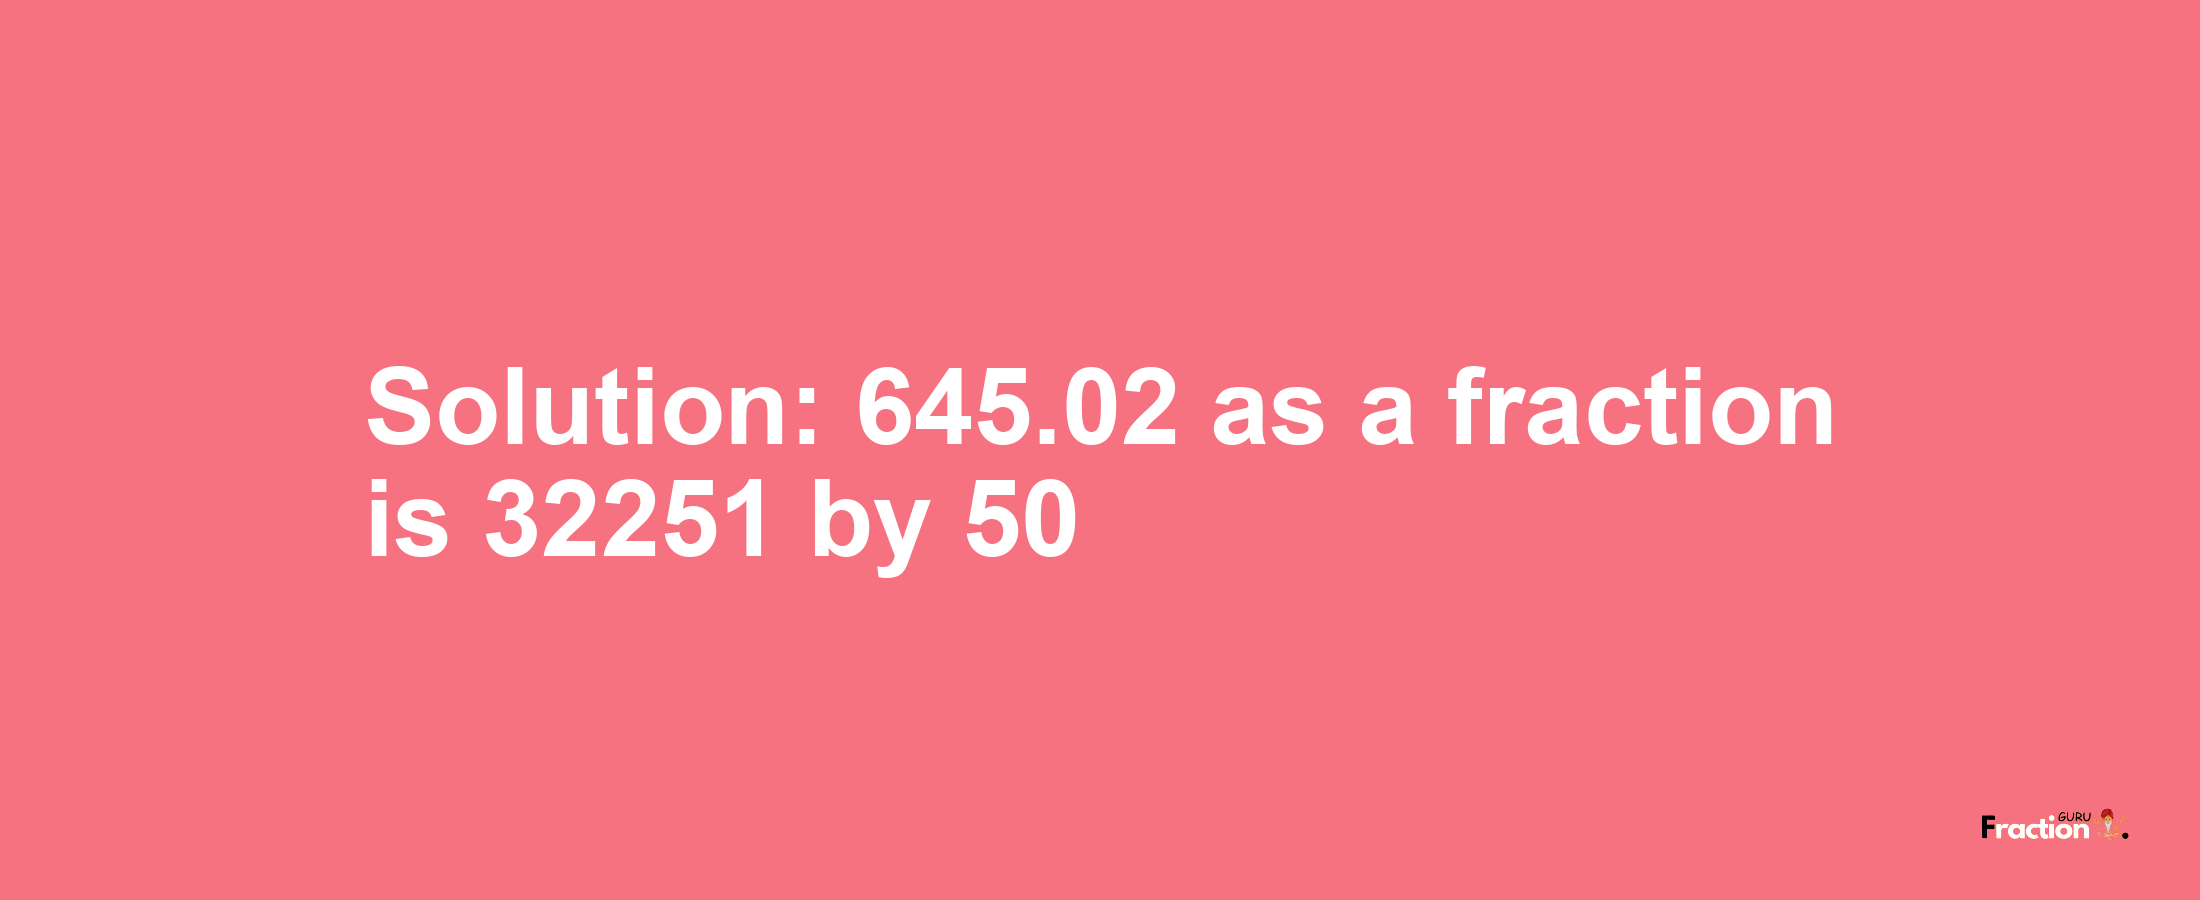 Solution:645.02 as a fraction is 32251/50